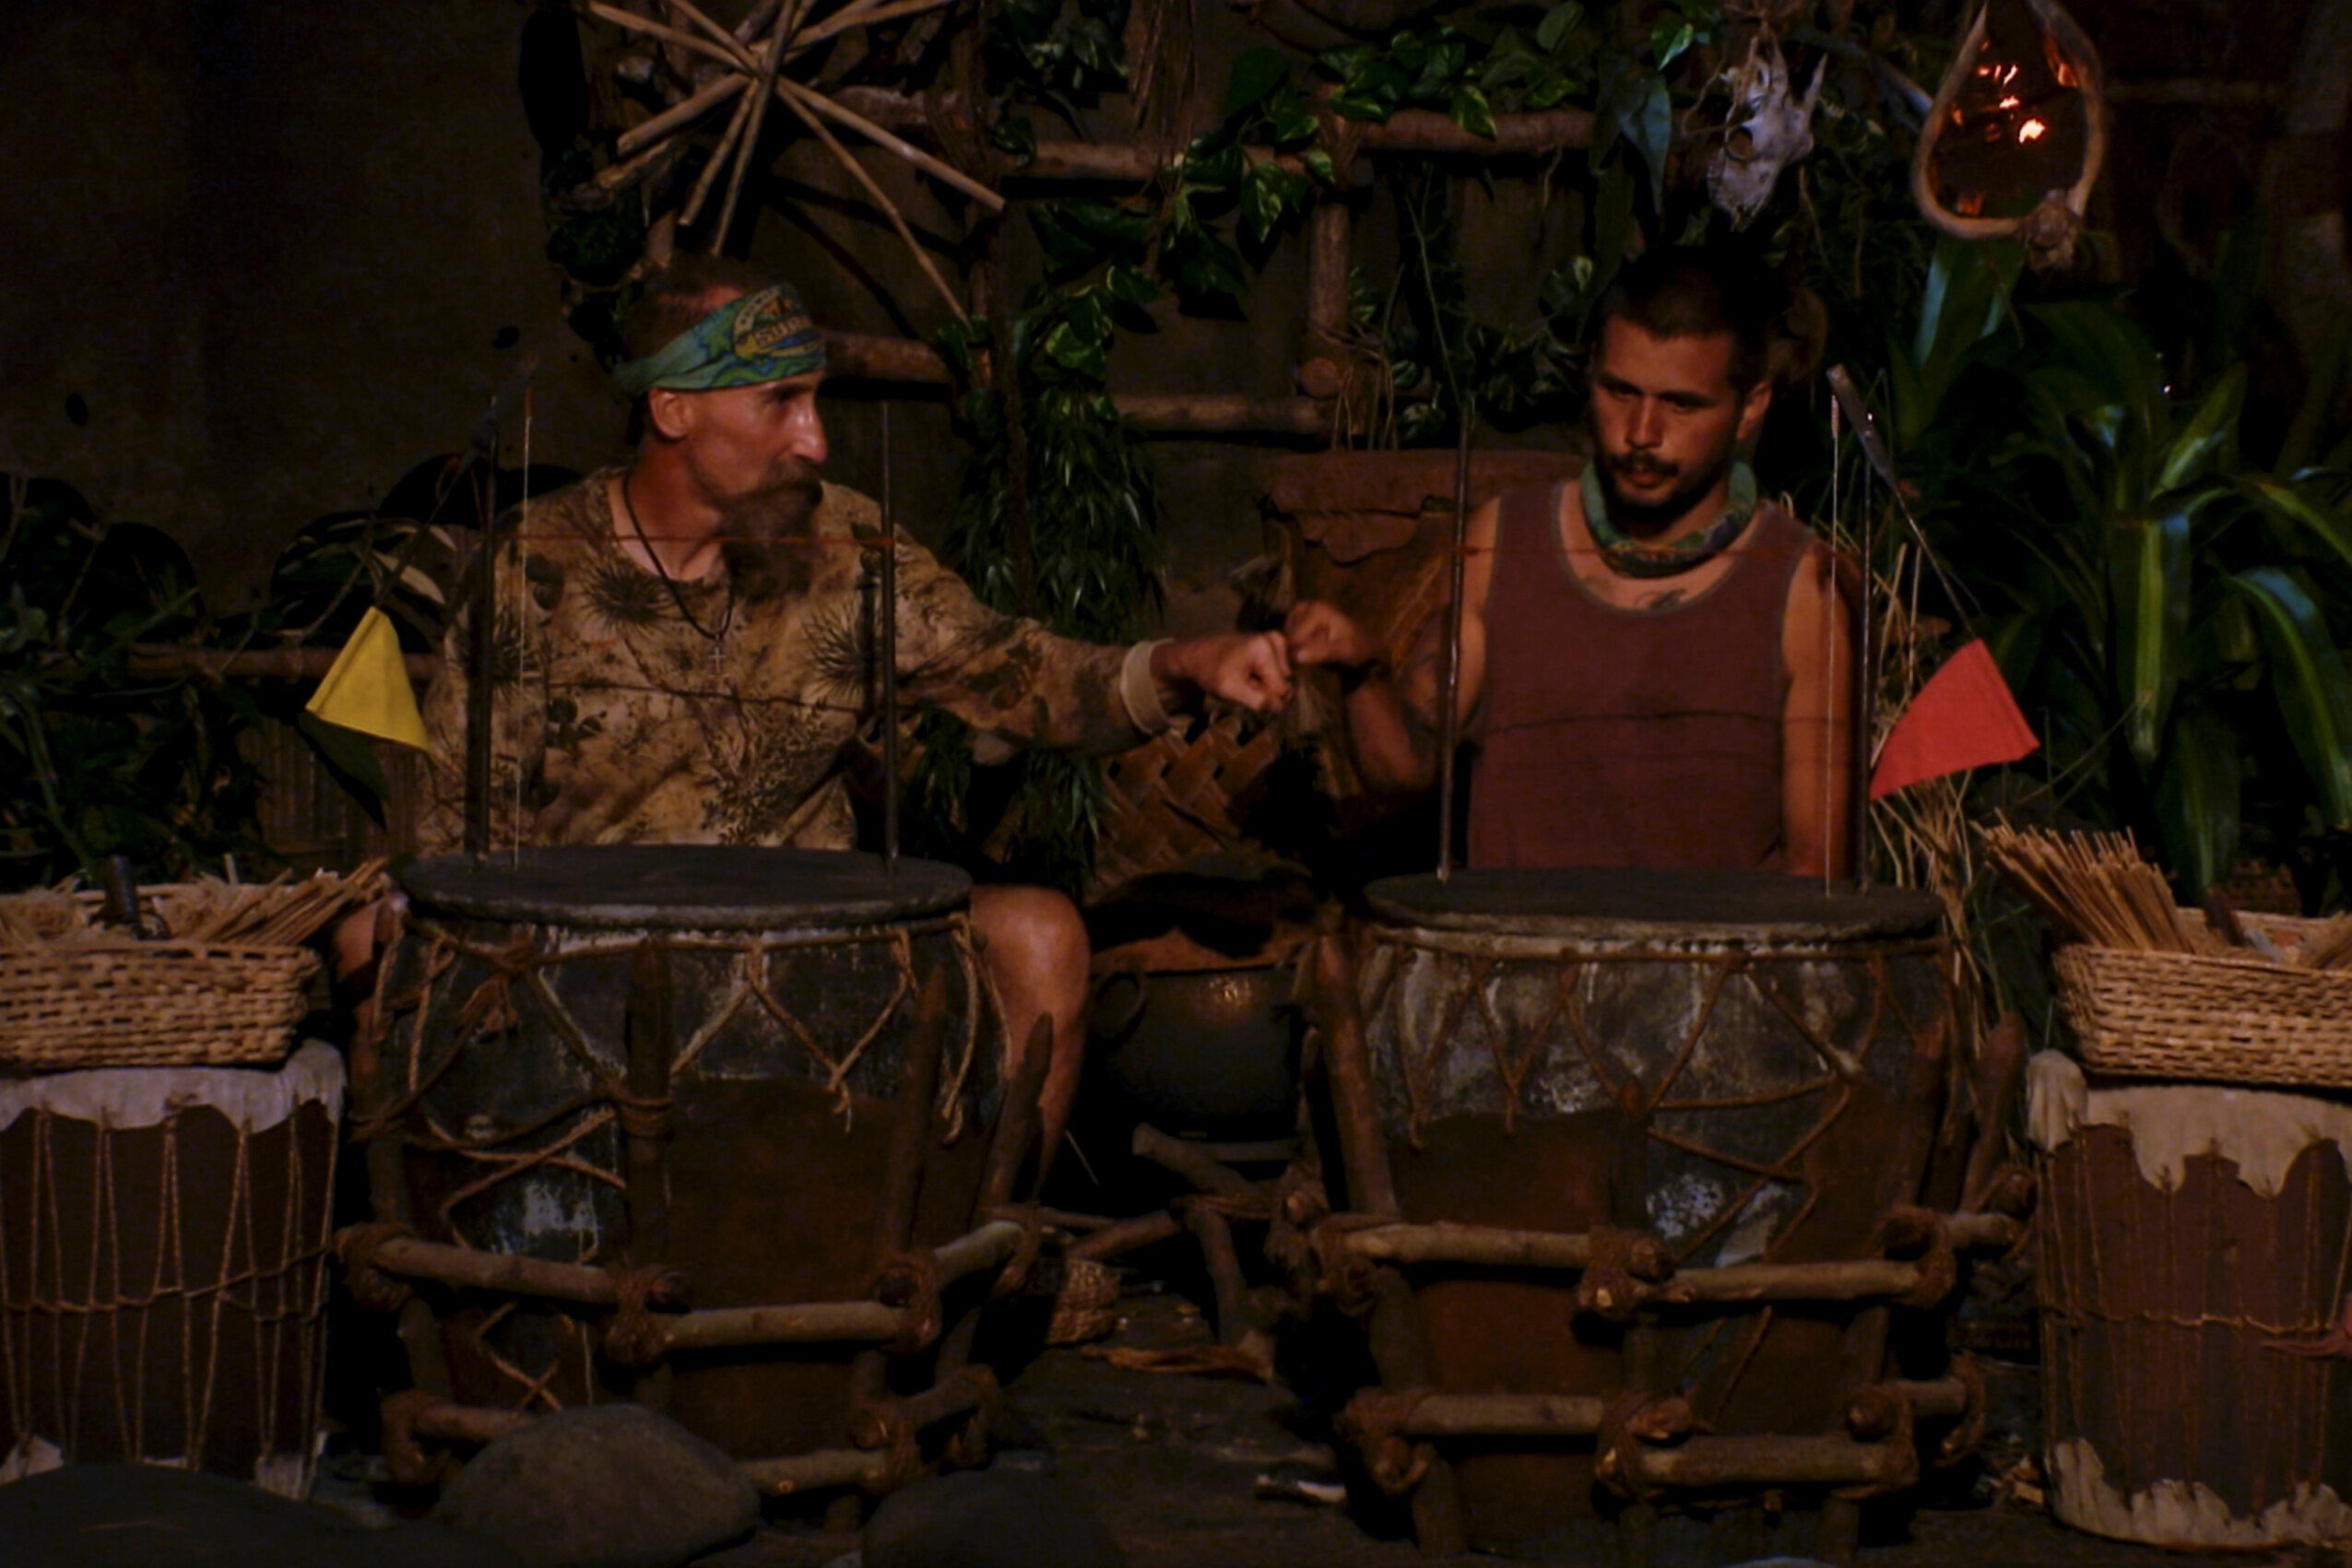 Mike Gabler and Jesse Lopez, who starred in 'Survivor' Season 43 on CBS, compete in the fire-making challenge. Gabler wears a camo shirt. Jesse wears a faded red tank top.